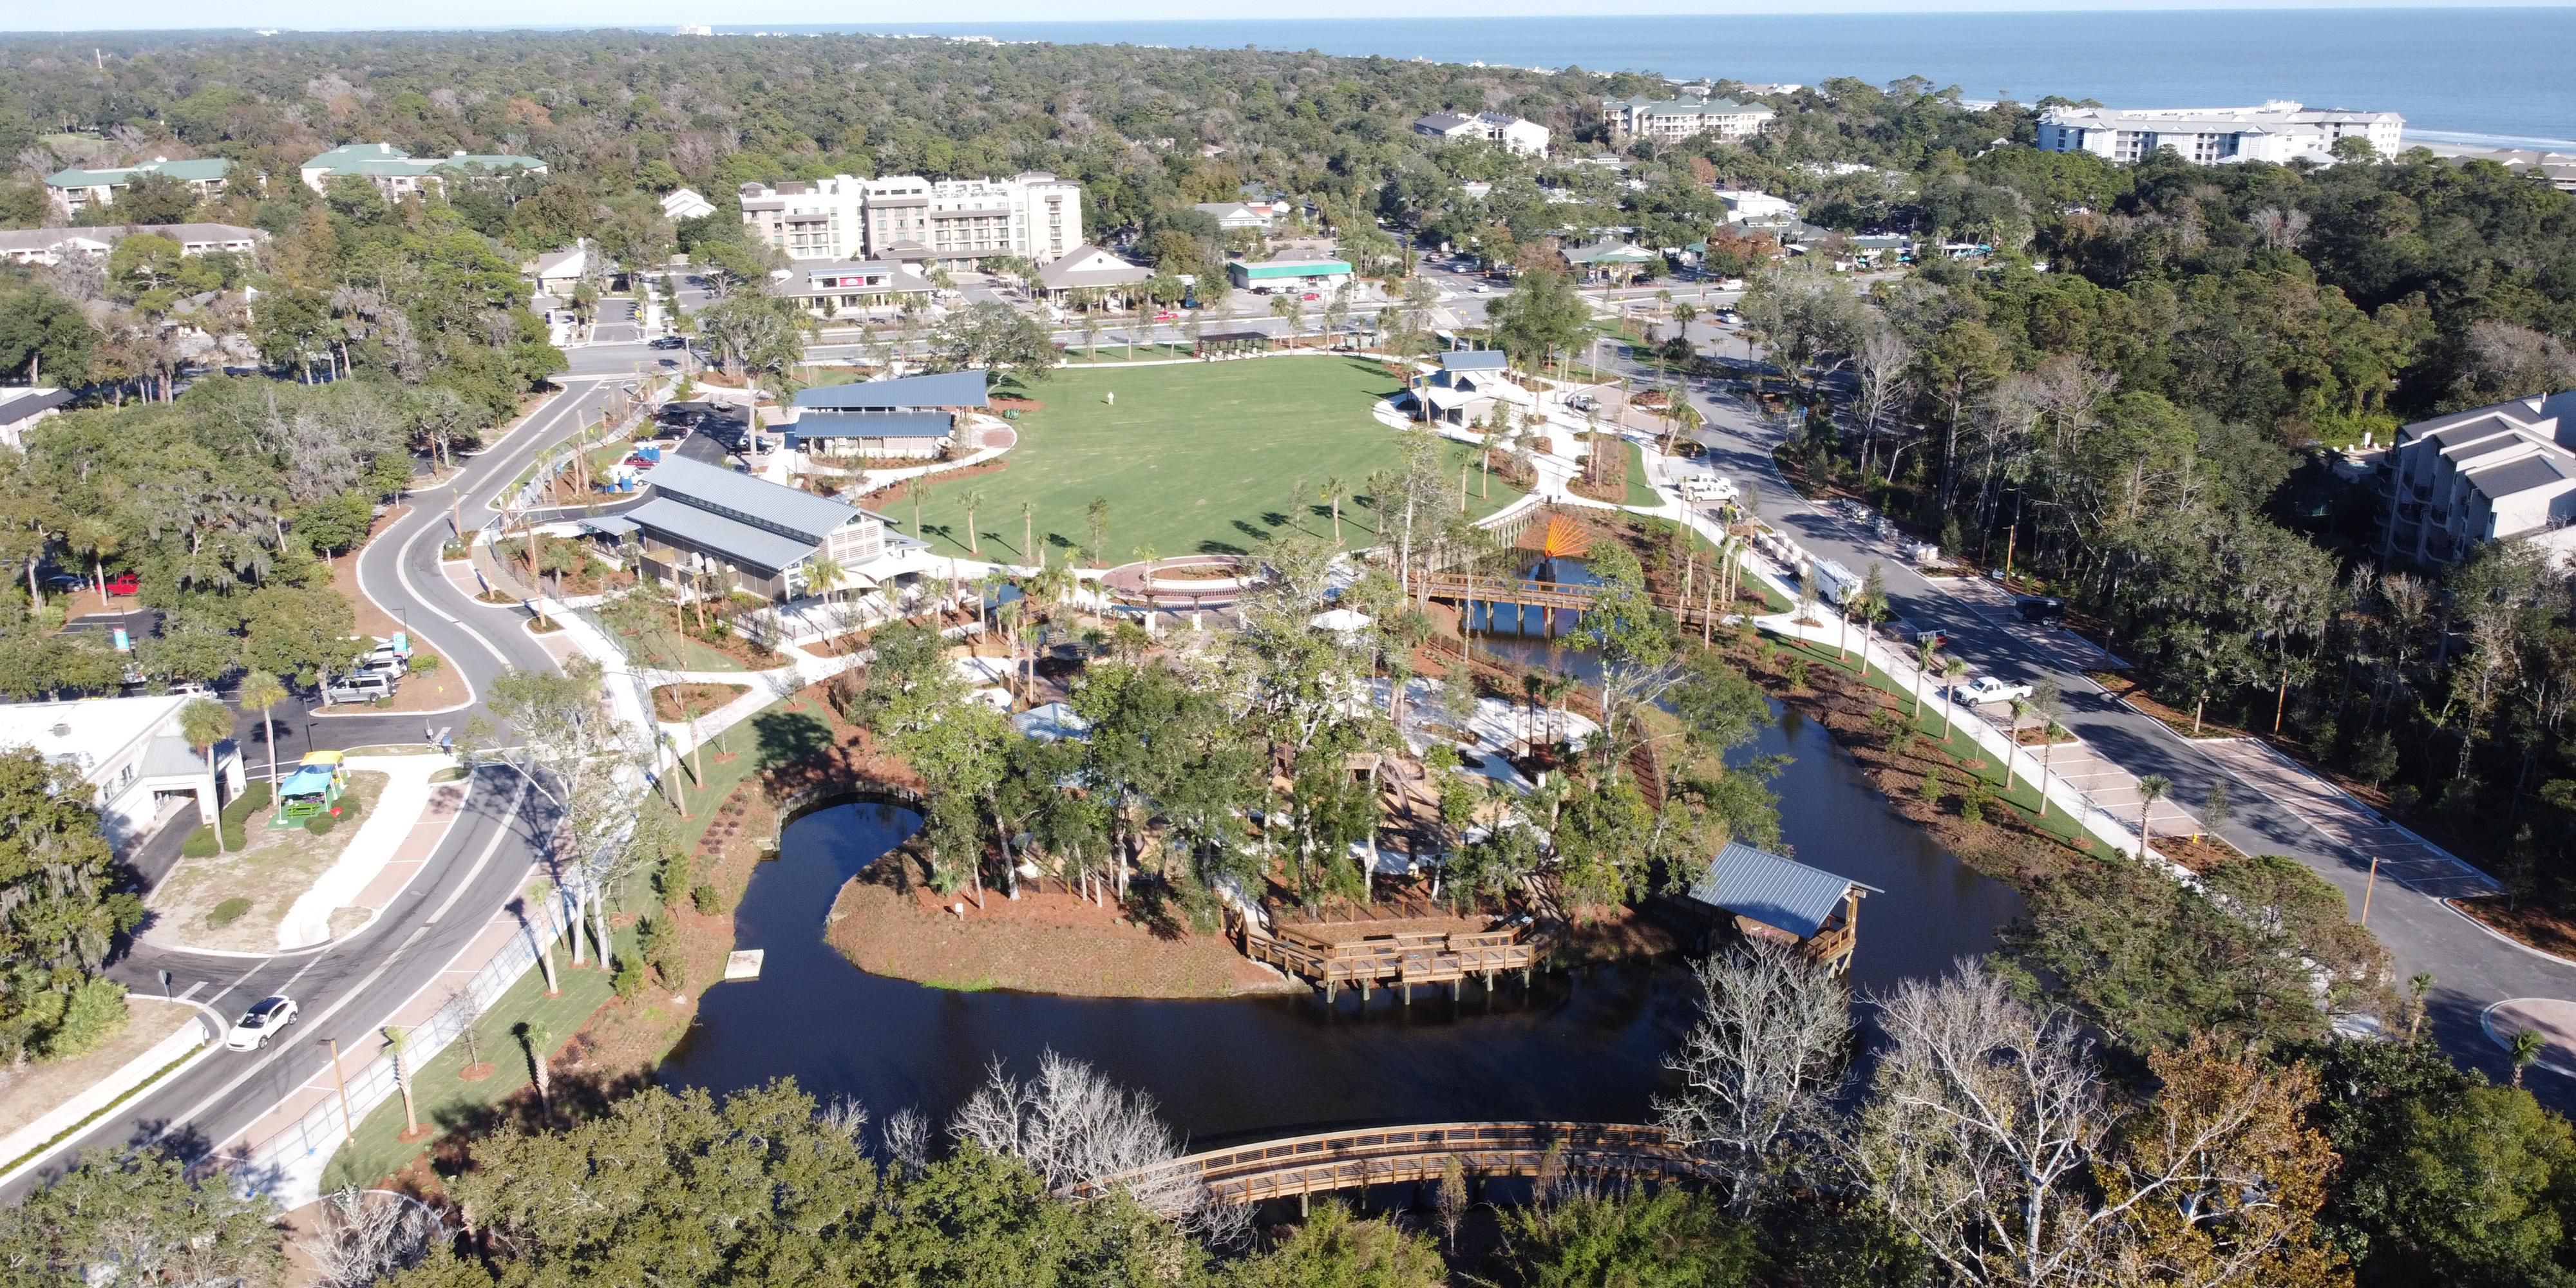 Our adjacent neighbor Lowcountry Celebration Park has 10 acres of outdoor fun for everyone! You will find walking trails, fitness stations, grassy lawn space, a pirate ship playground with a sandbox area and unique water features, children's museum, bandstand, and free WiFi!